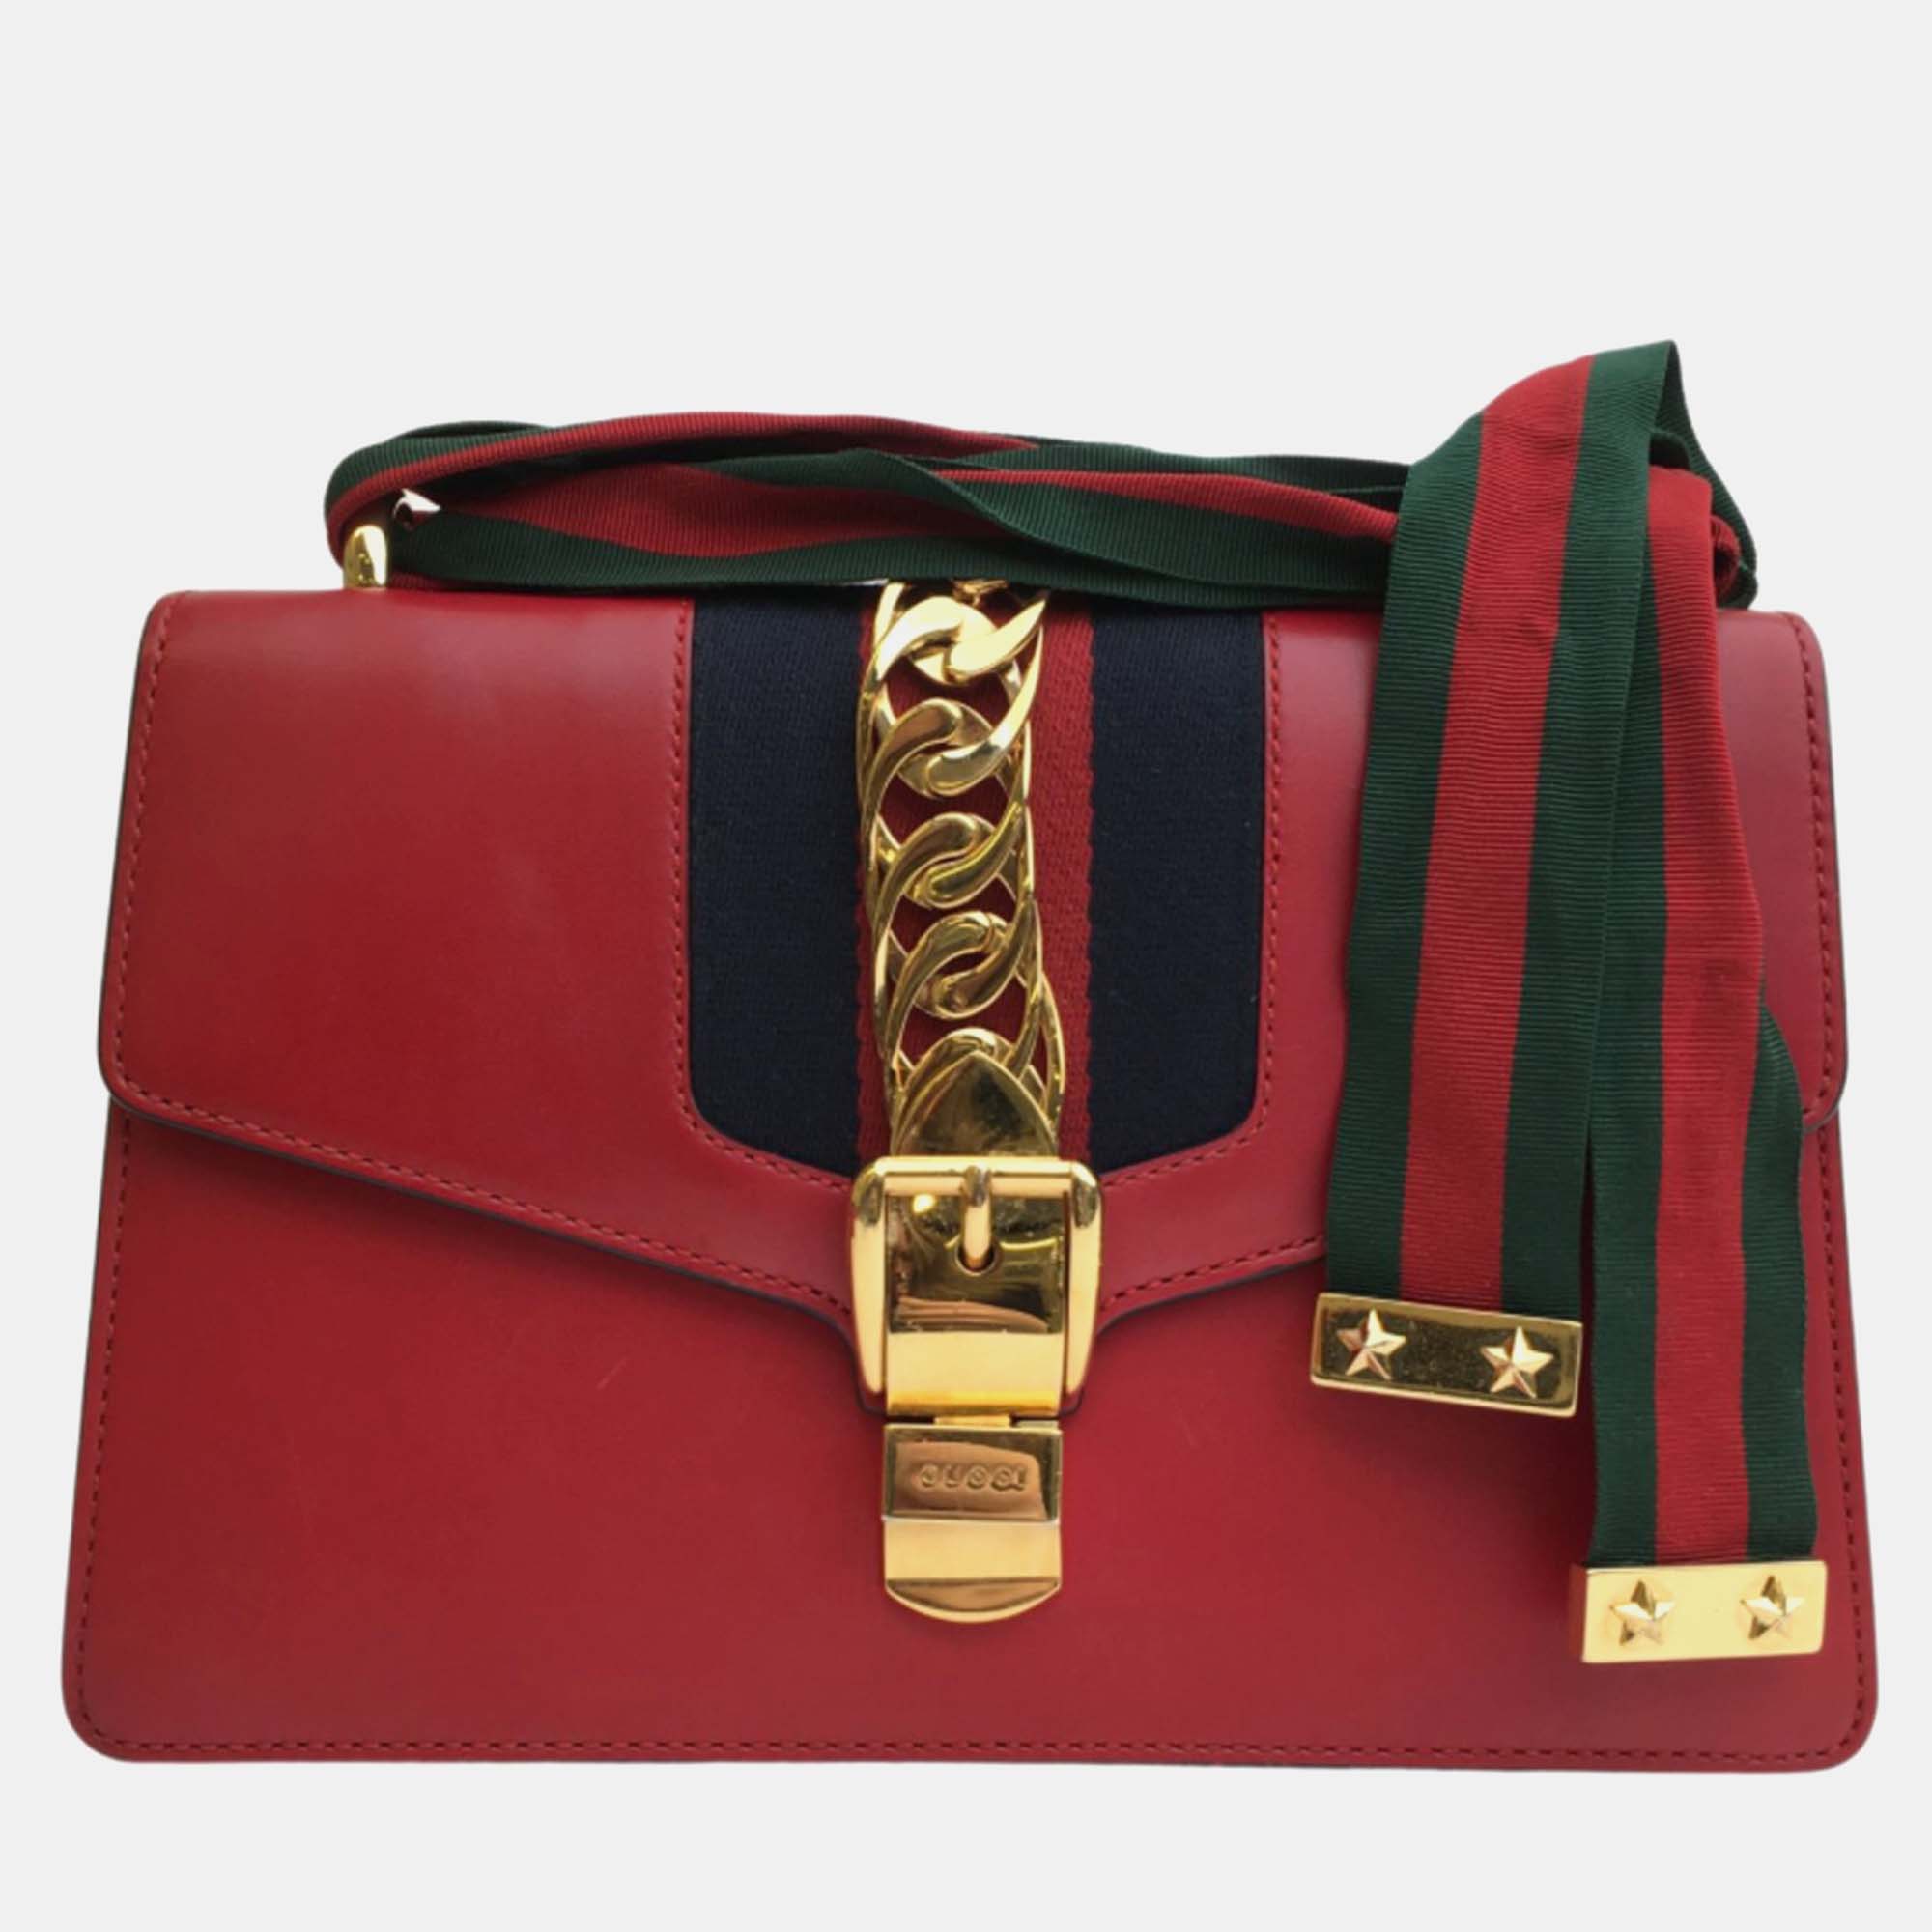 Gucci red leather small sylvie shoulder bag